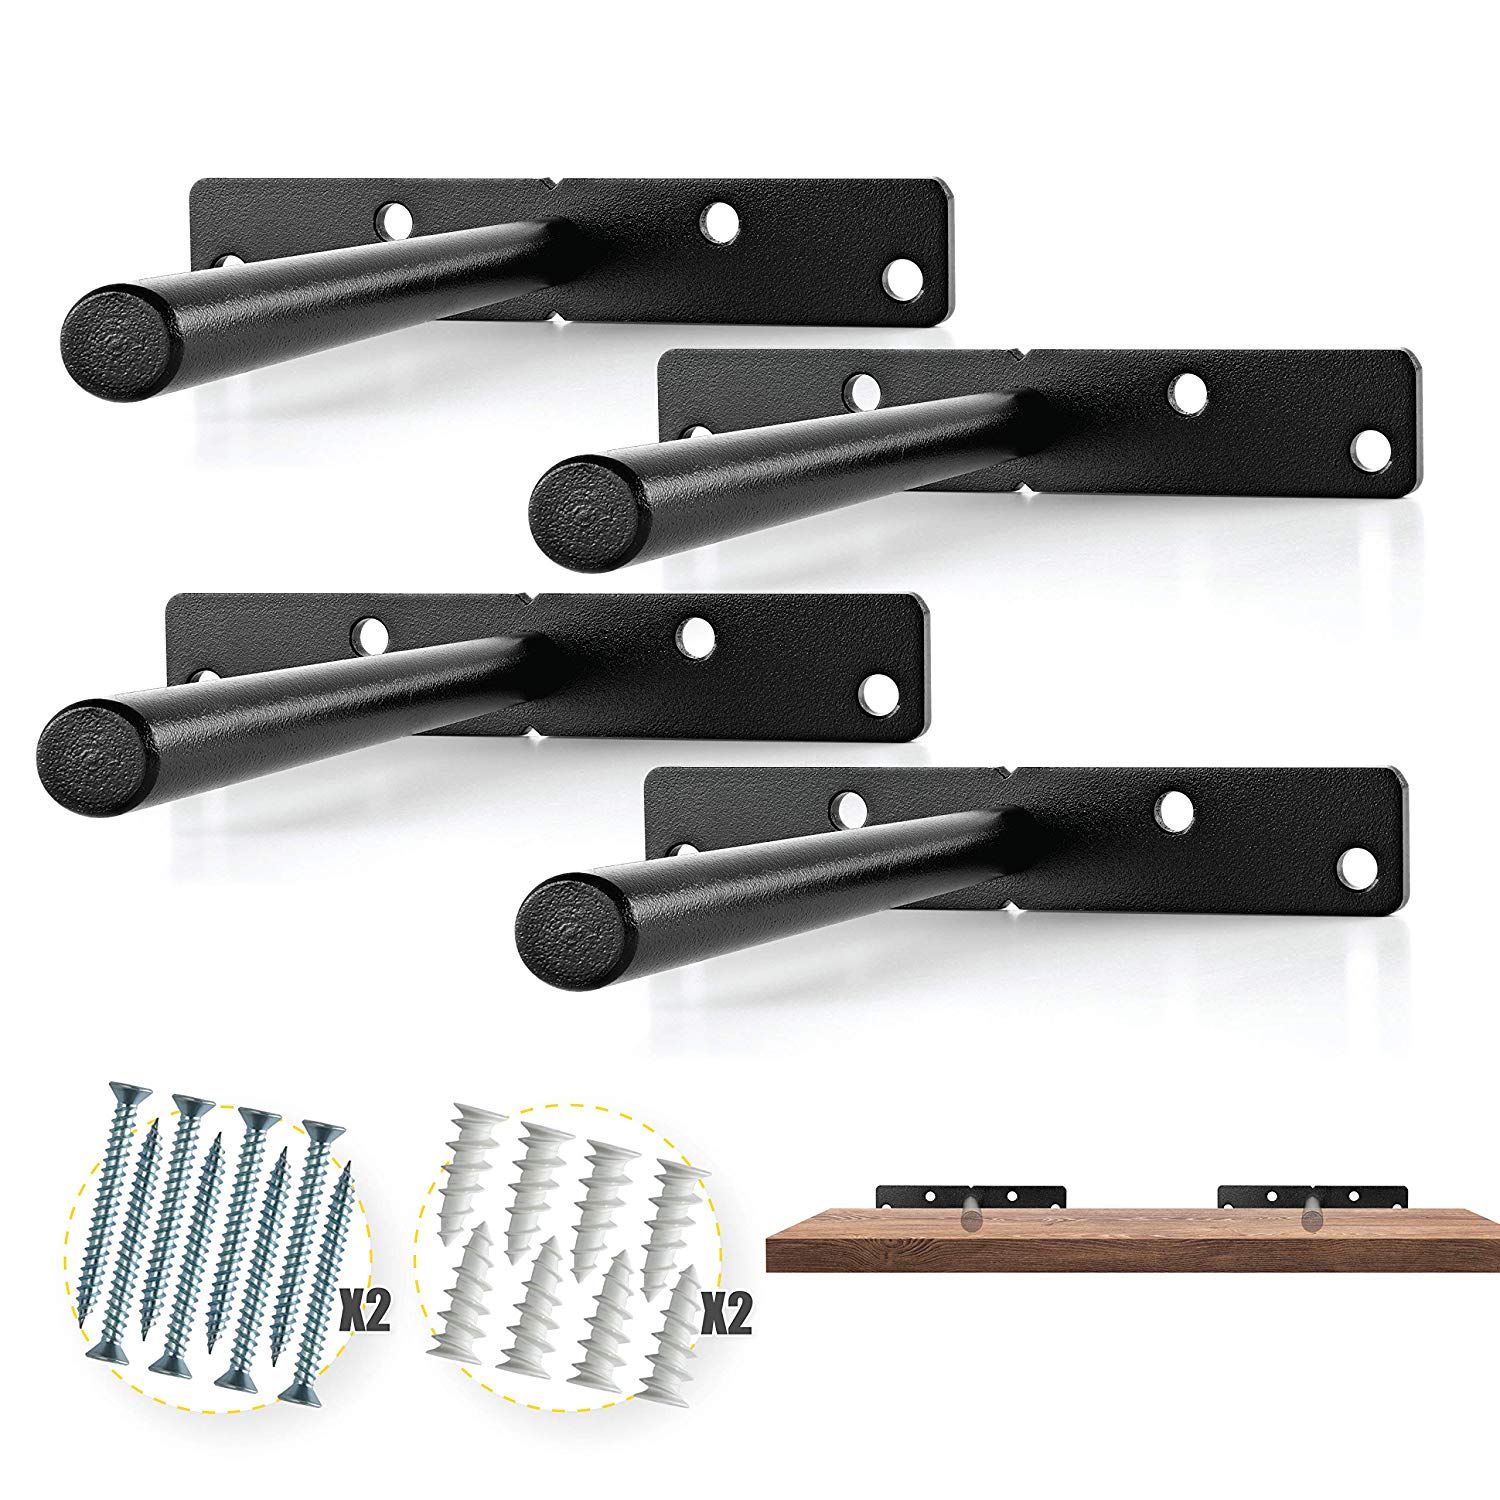 heavy duty floating shelf bracket pcs solid steel support concealed fixings blind supports hidden brackets for wood shelves screws and wall plugs included ikea hack lack secret